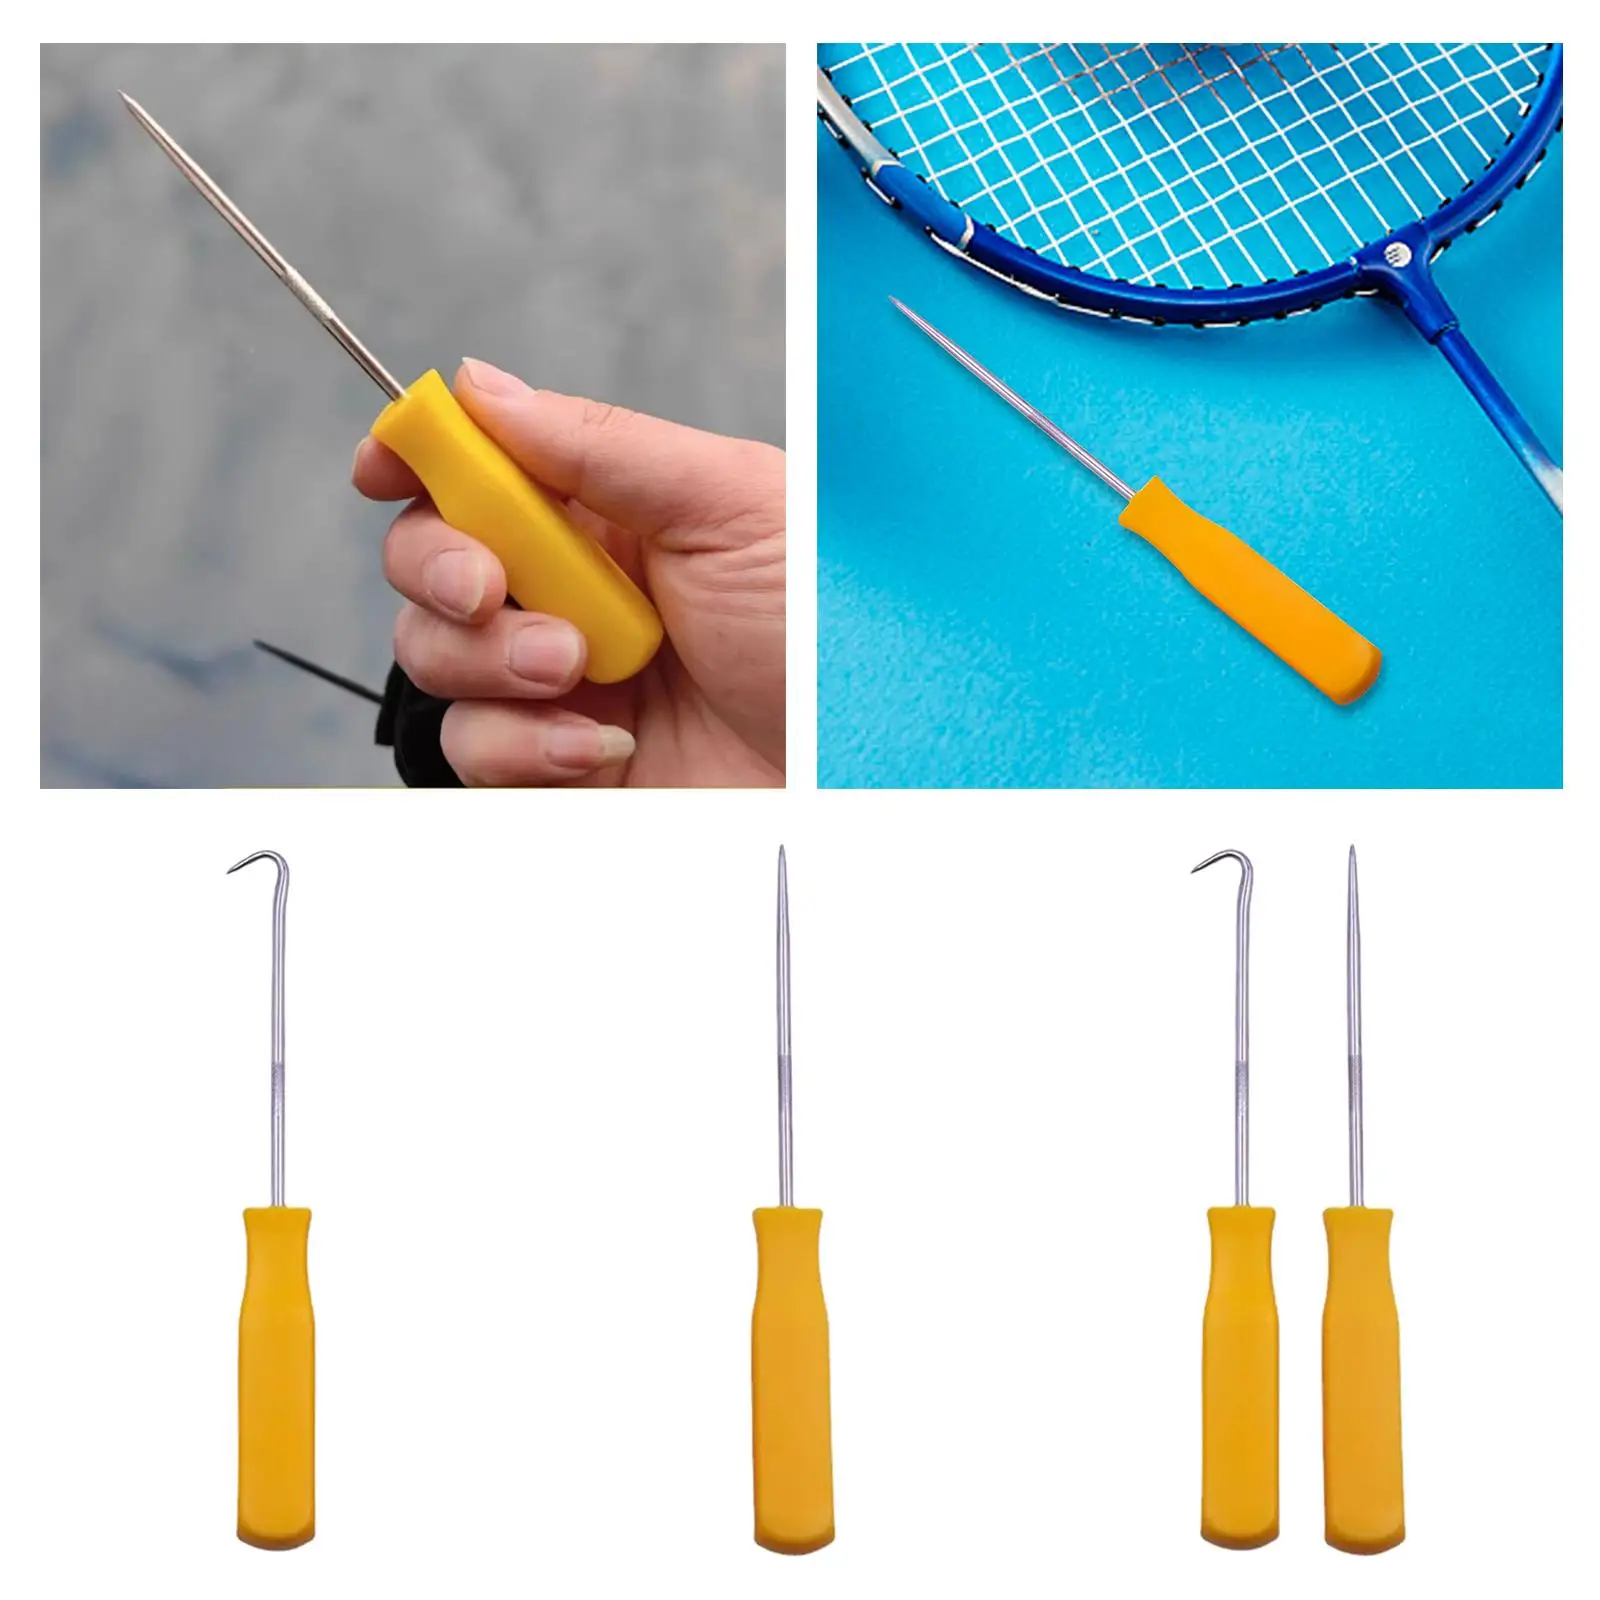 Racket Stringing Tool Convenient to Use Sports Tennis Stringing Machine Tool